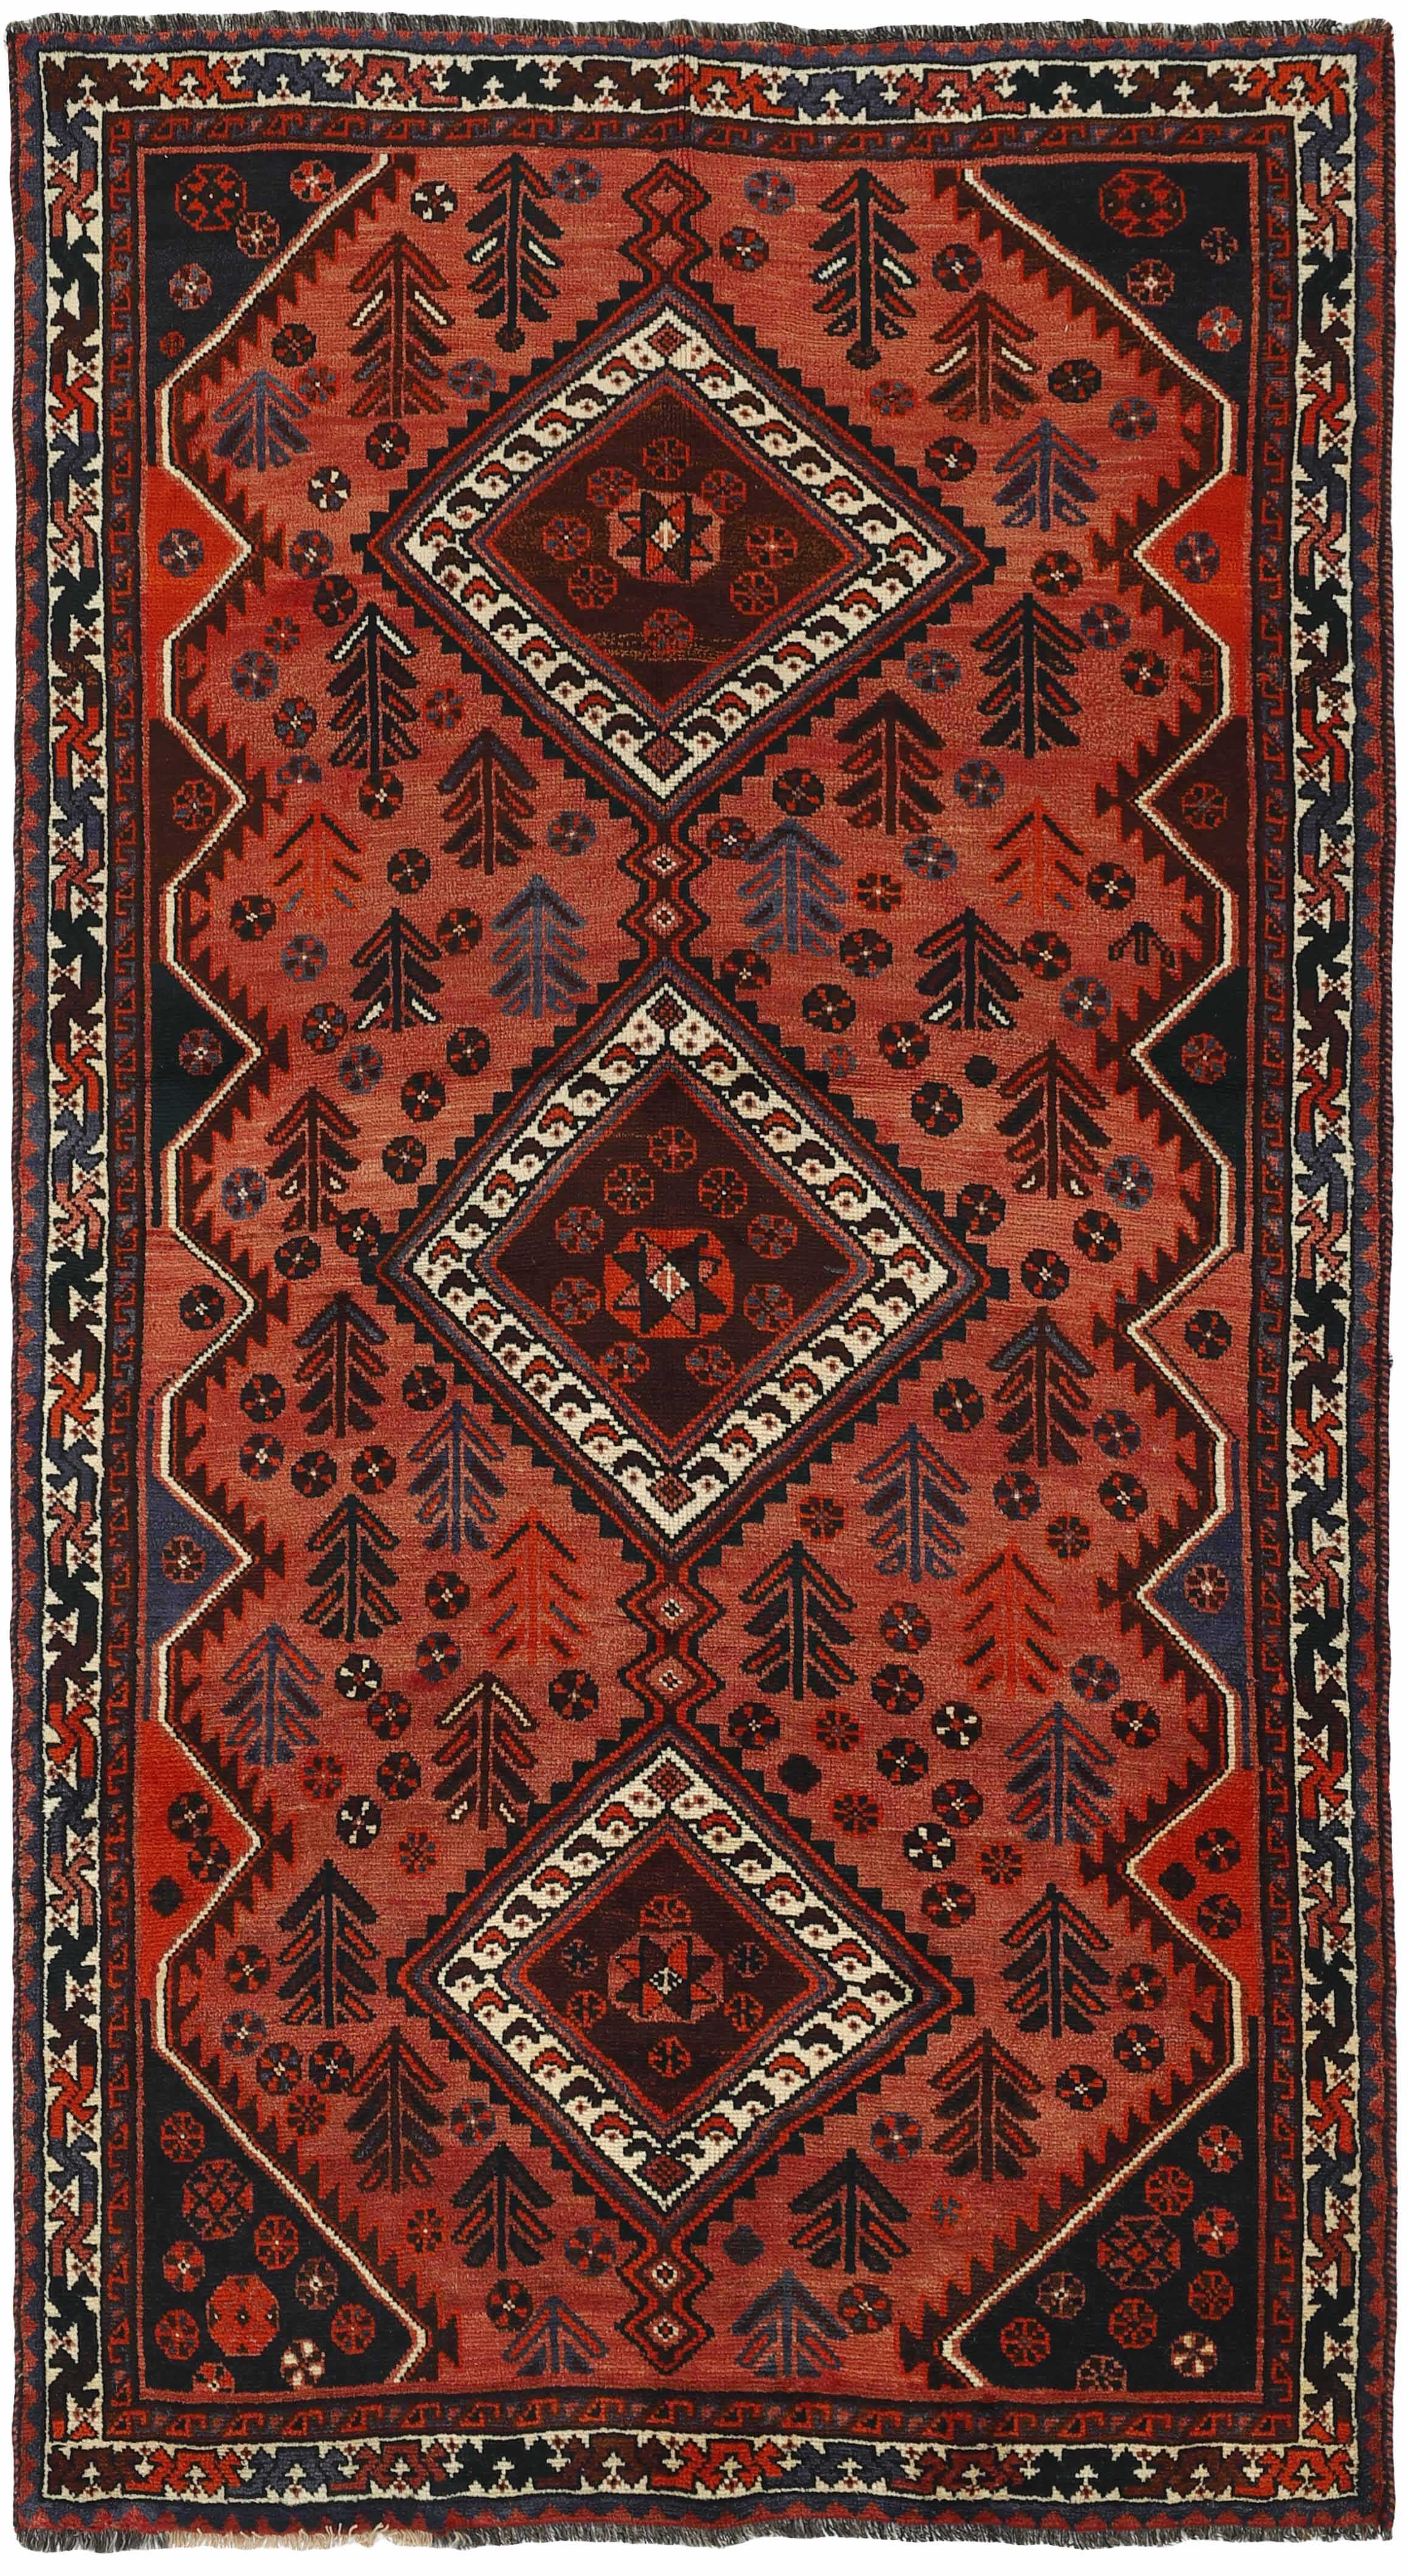 Authentic persian rug with a traditional tribal geometric pattern in red, beige and black